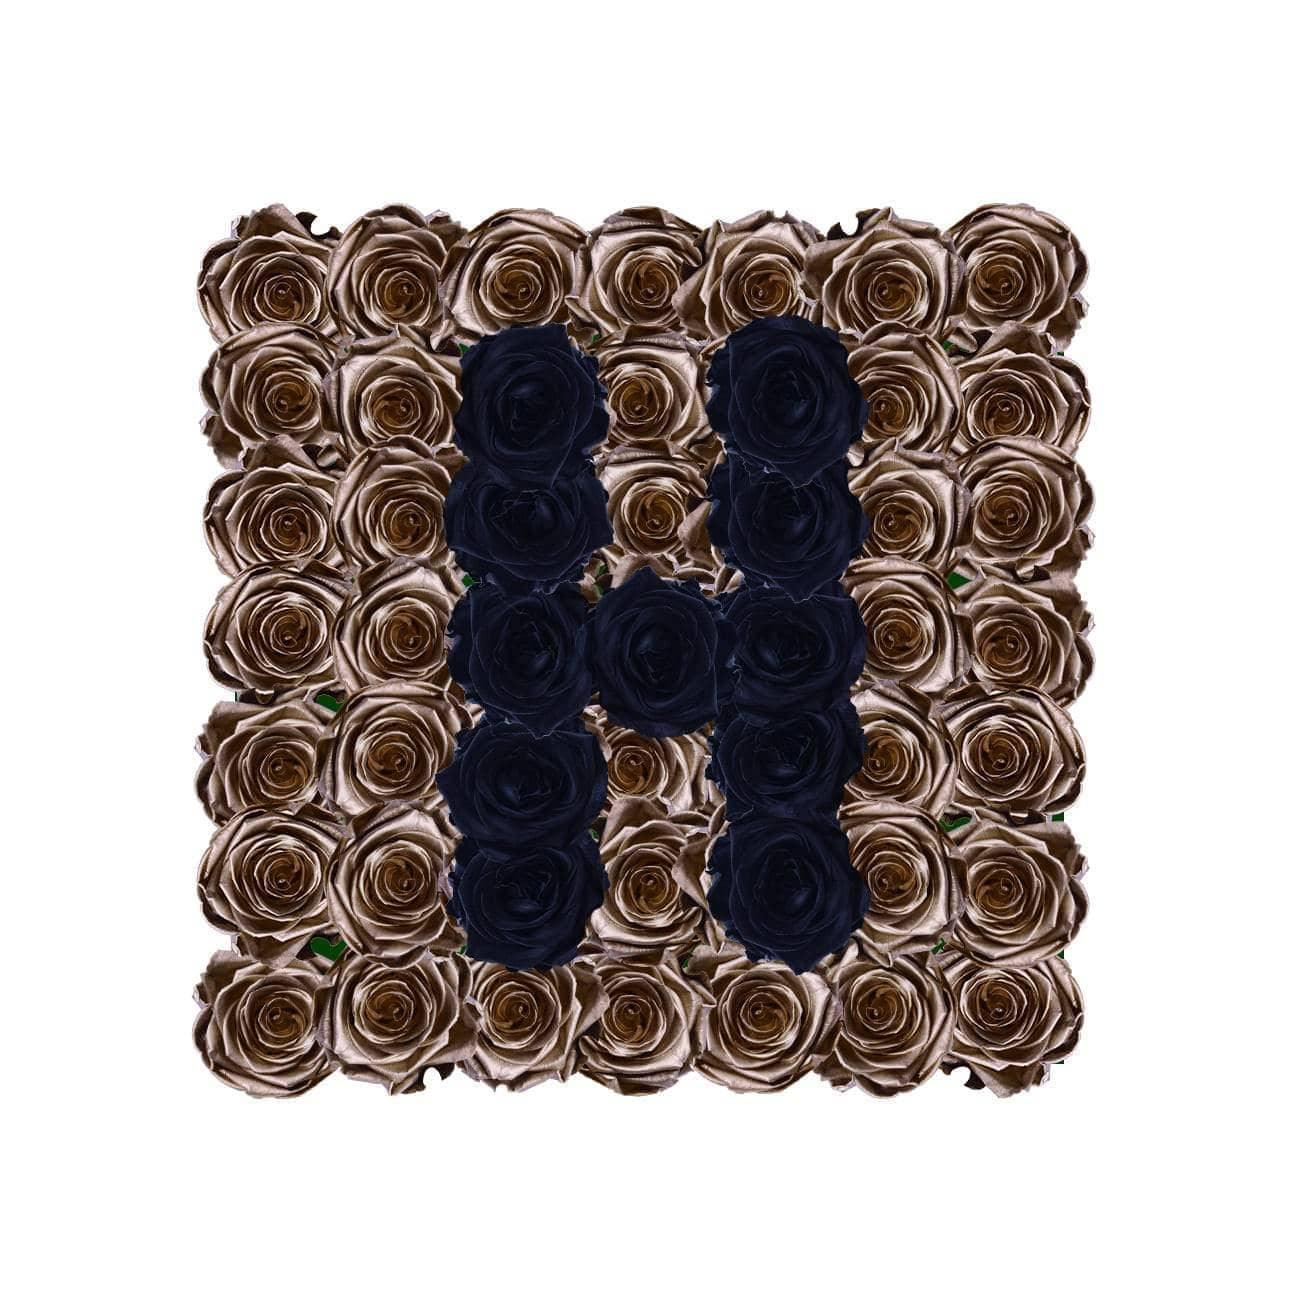 Infinity Letter H - BLACK AND BLANC